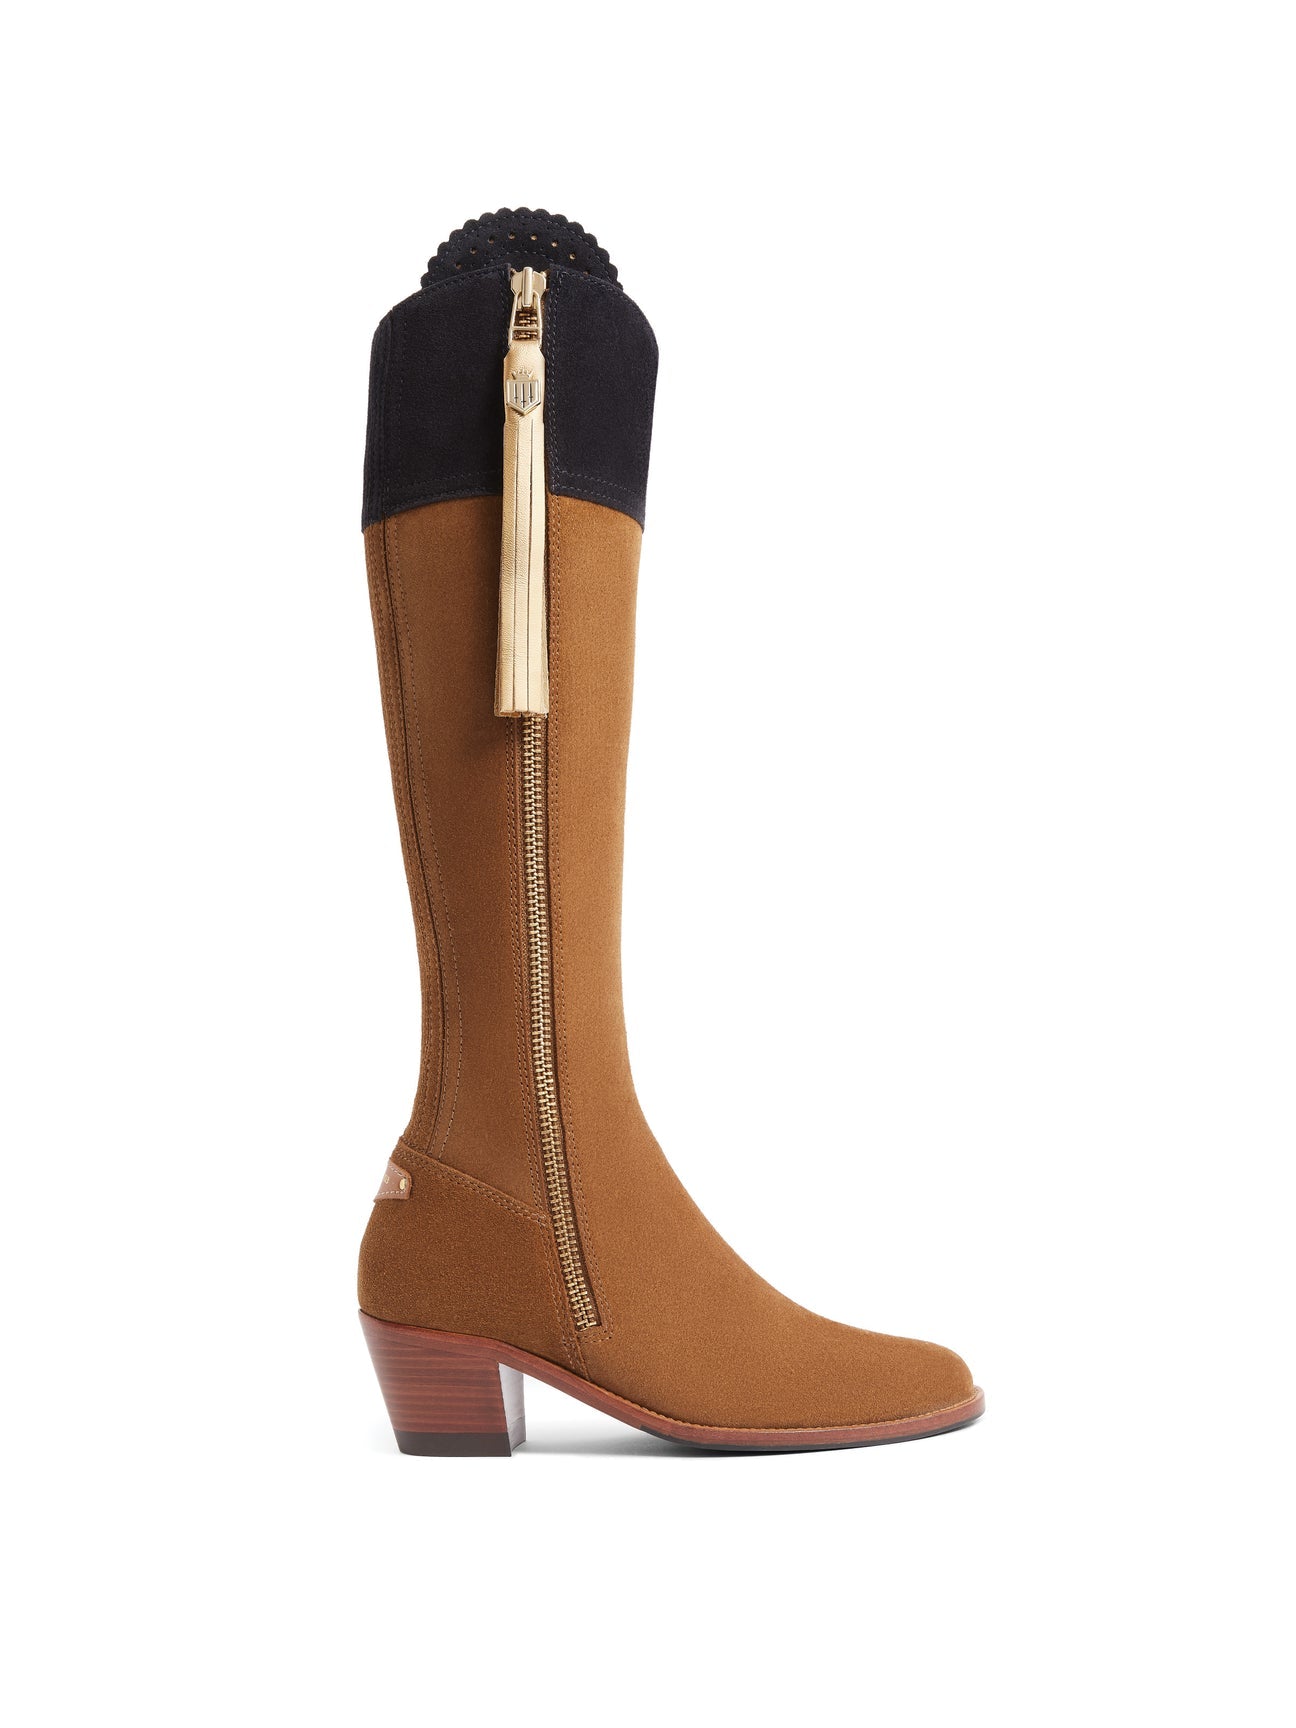 The Regina Women’s Tall Heeled Boot - Tan, Navy & Gold Suede- Sporting Fit